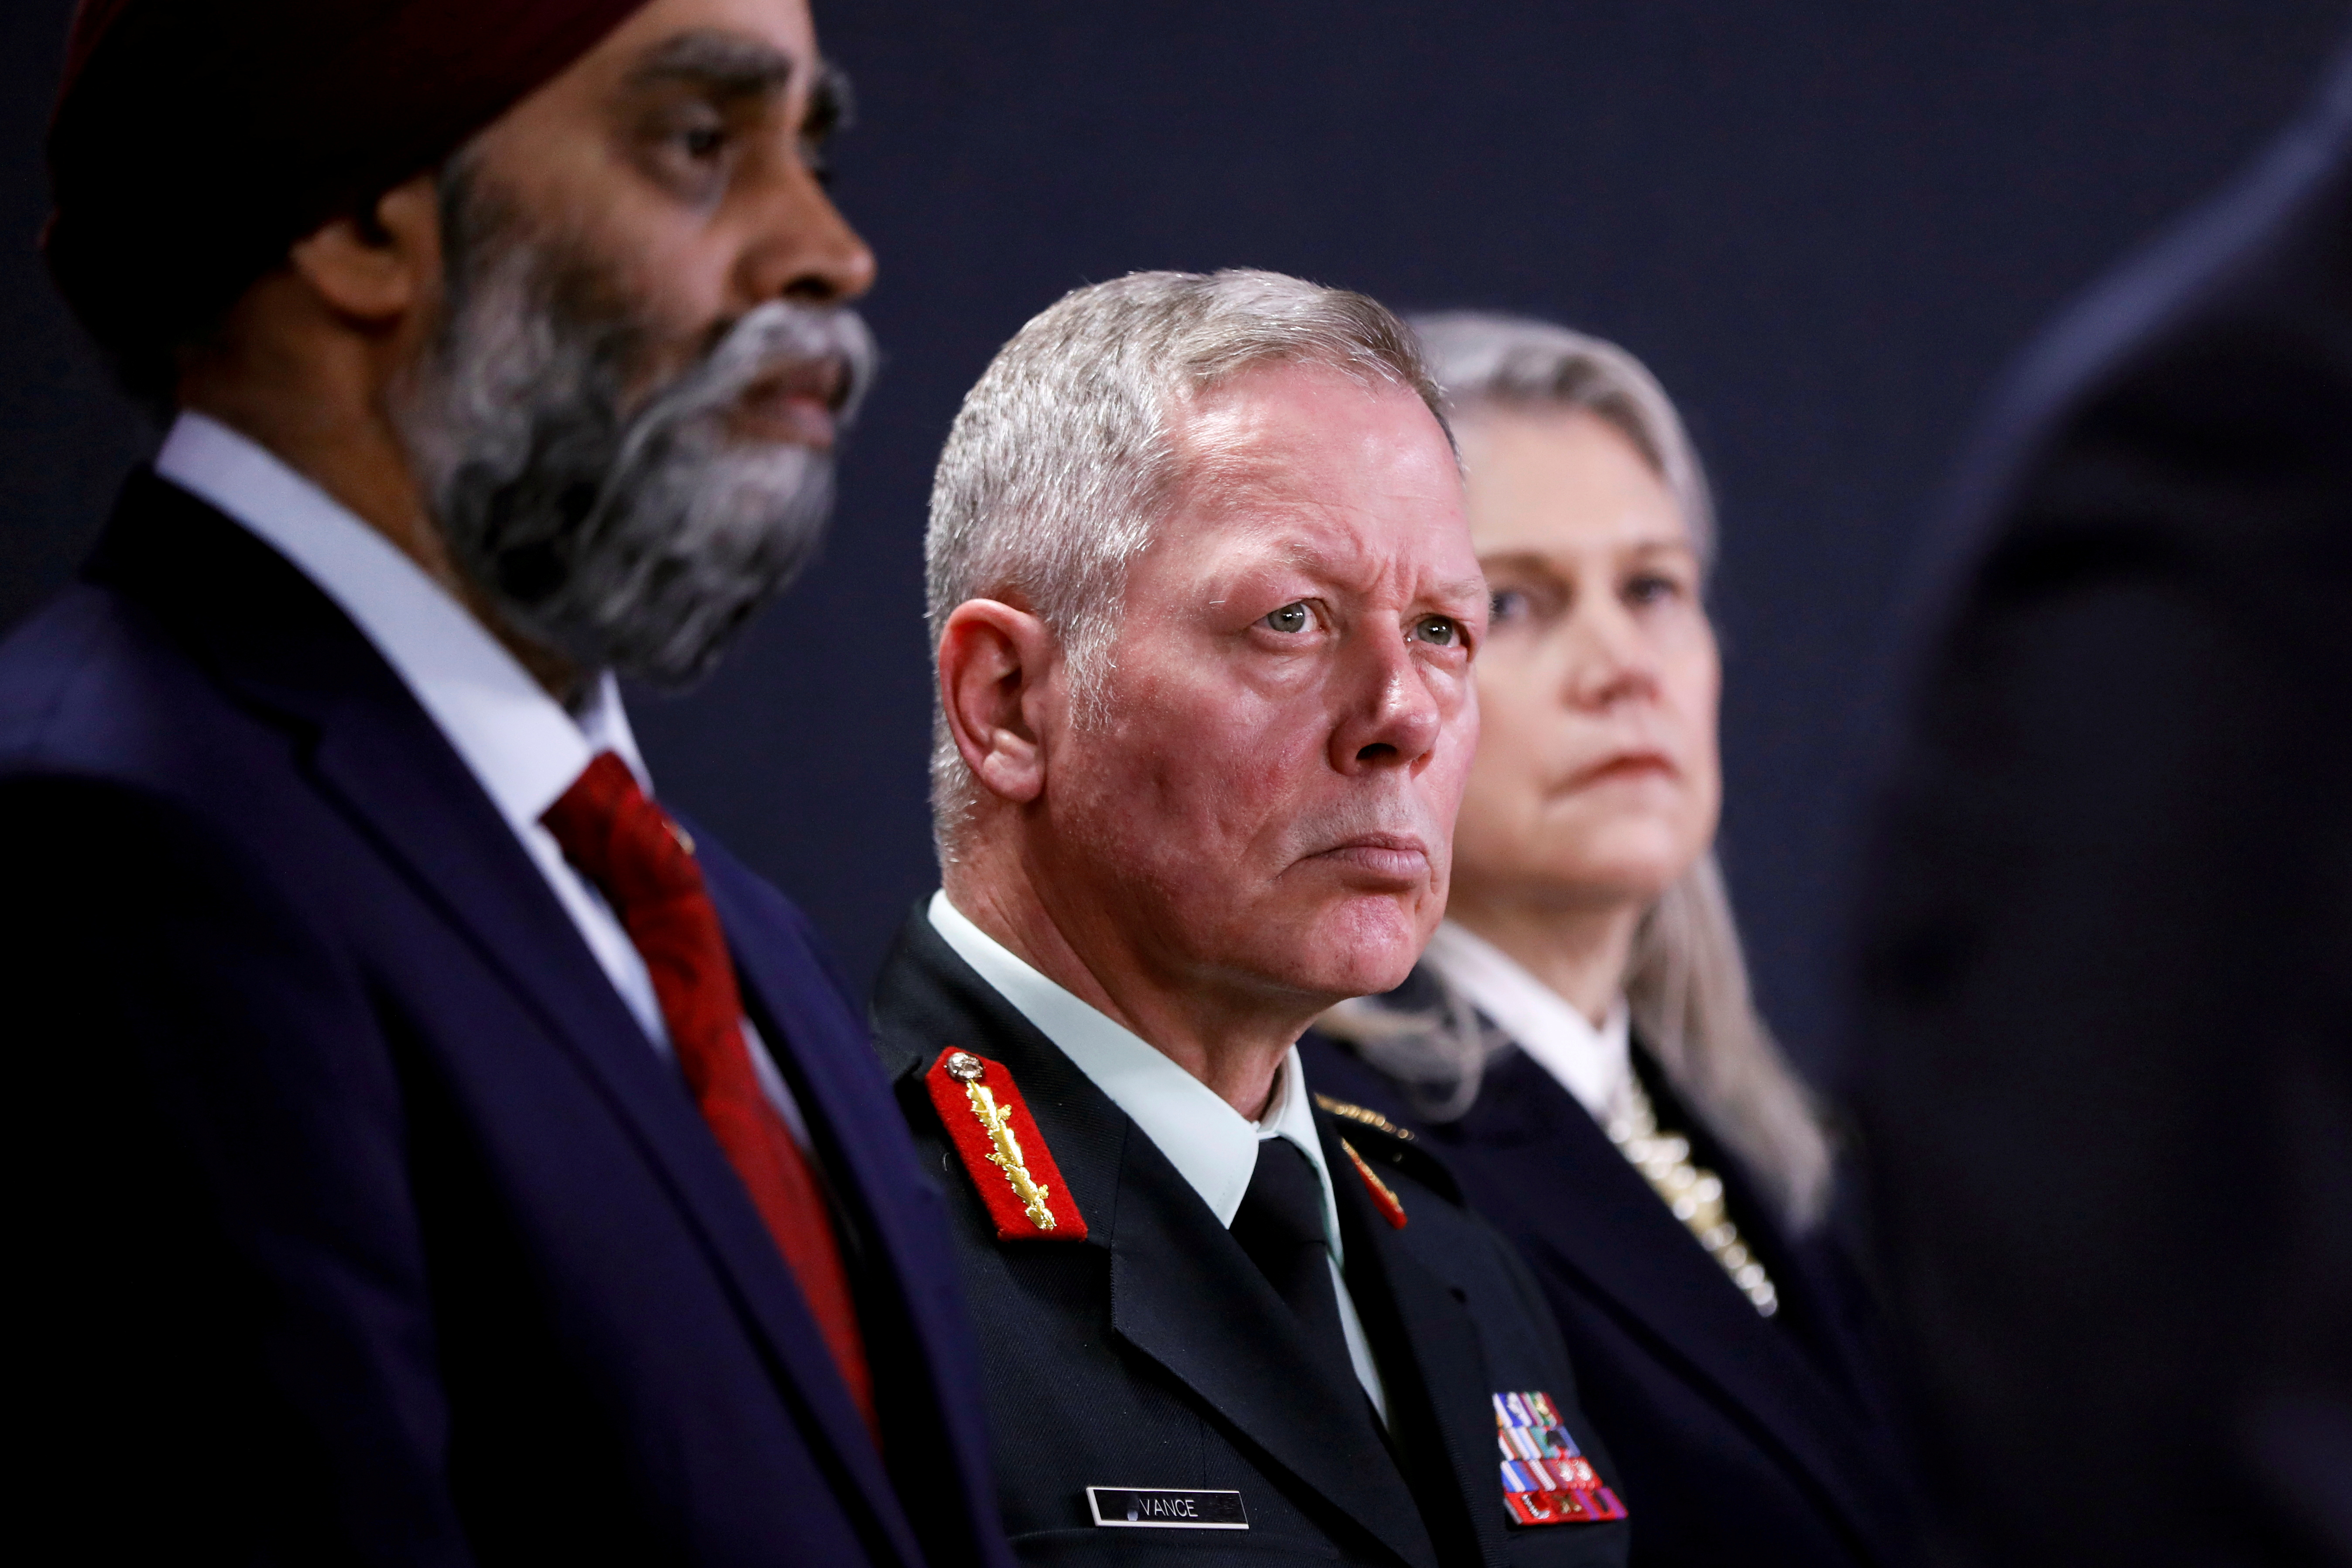 Canada's Chief of the Defence Staff General Jonathan Vance, between Minister of National Defence Harjit Sajjan and Deputy Minister of National Defence Jody Thomas, attends a news conference in Ottawa